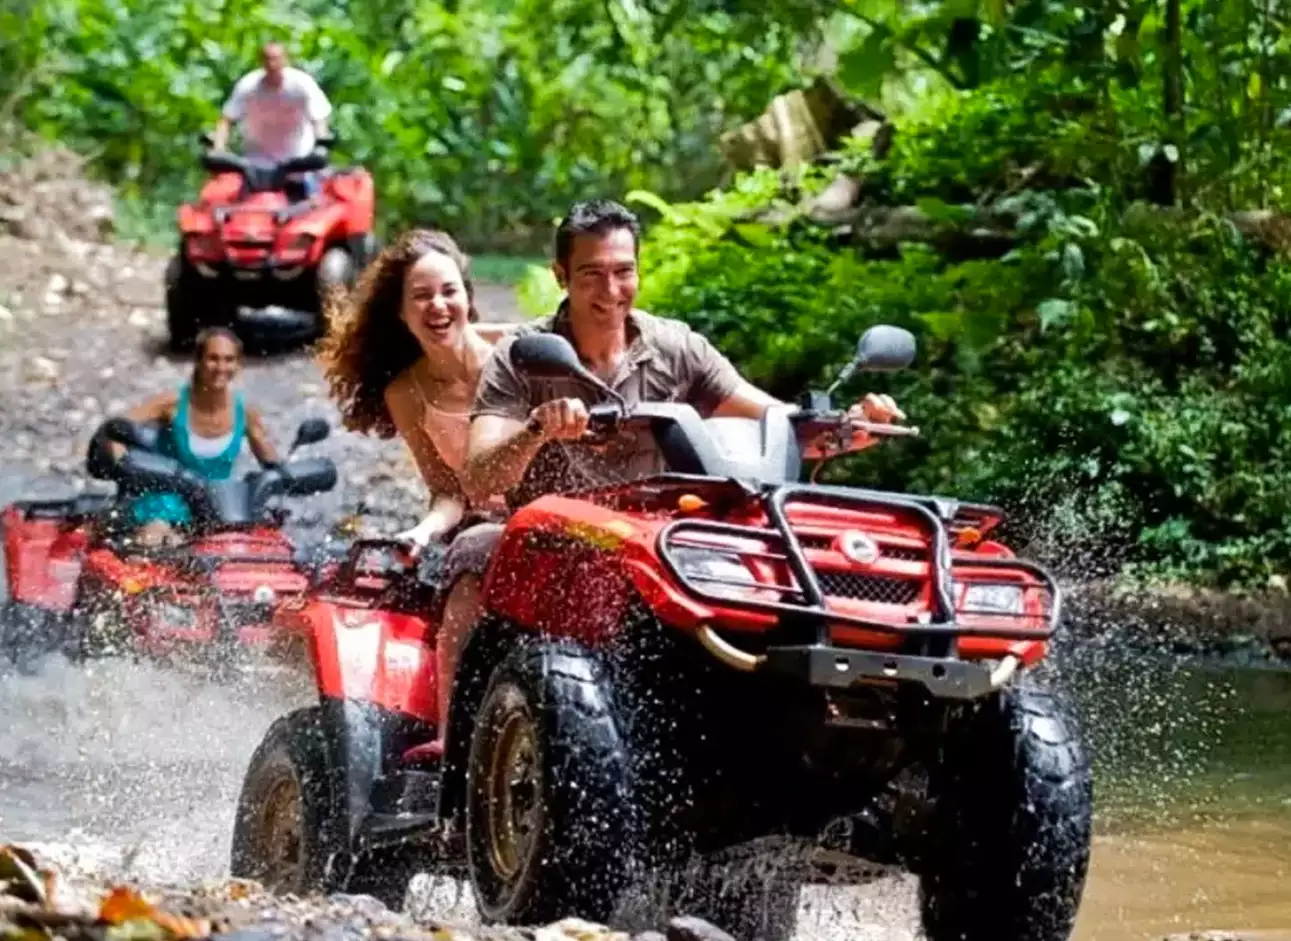 ATV and Go Karts - Have a blast with exhilarating rides on ATVs and Go Karts